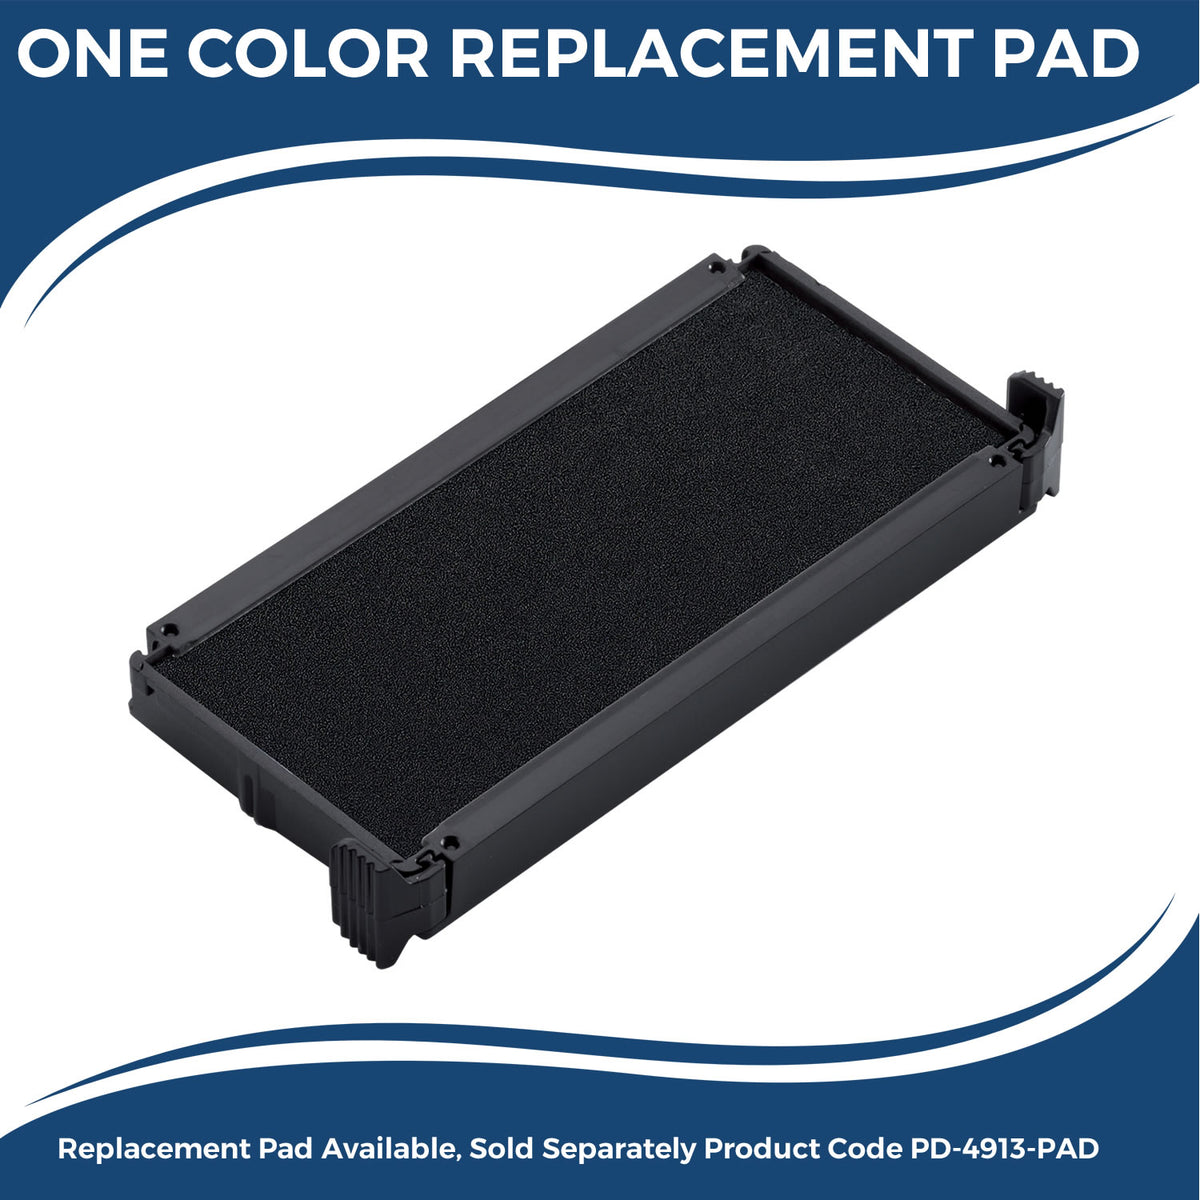 Large Self-Inking Economy Rate Stamp 4851S Large Replacment Pad